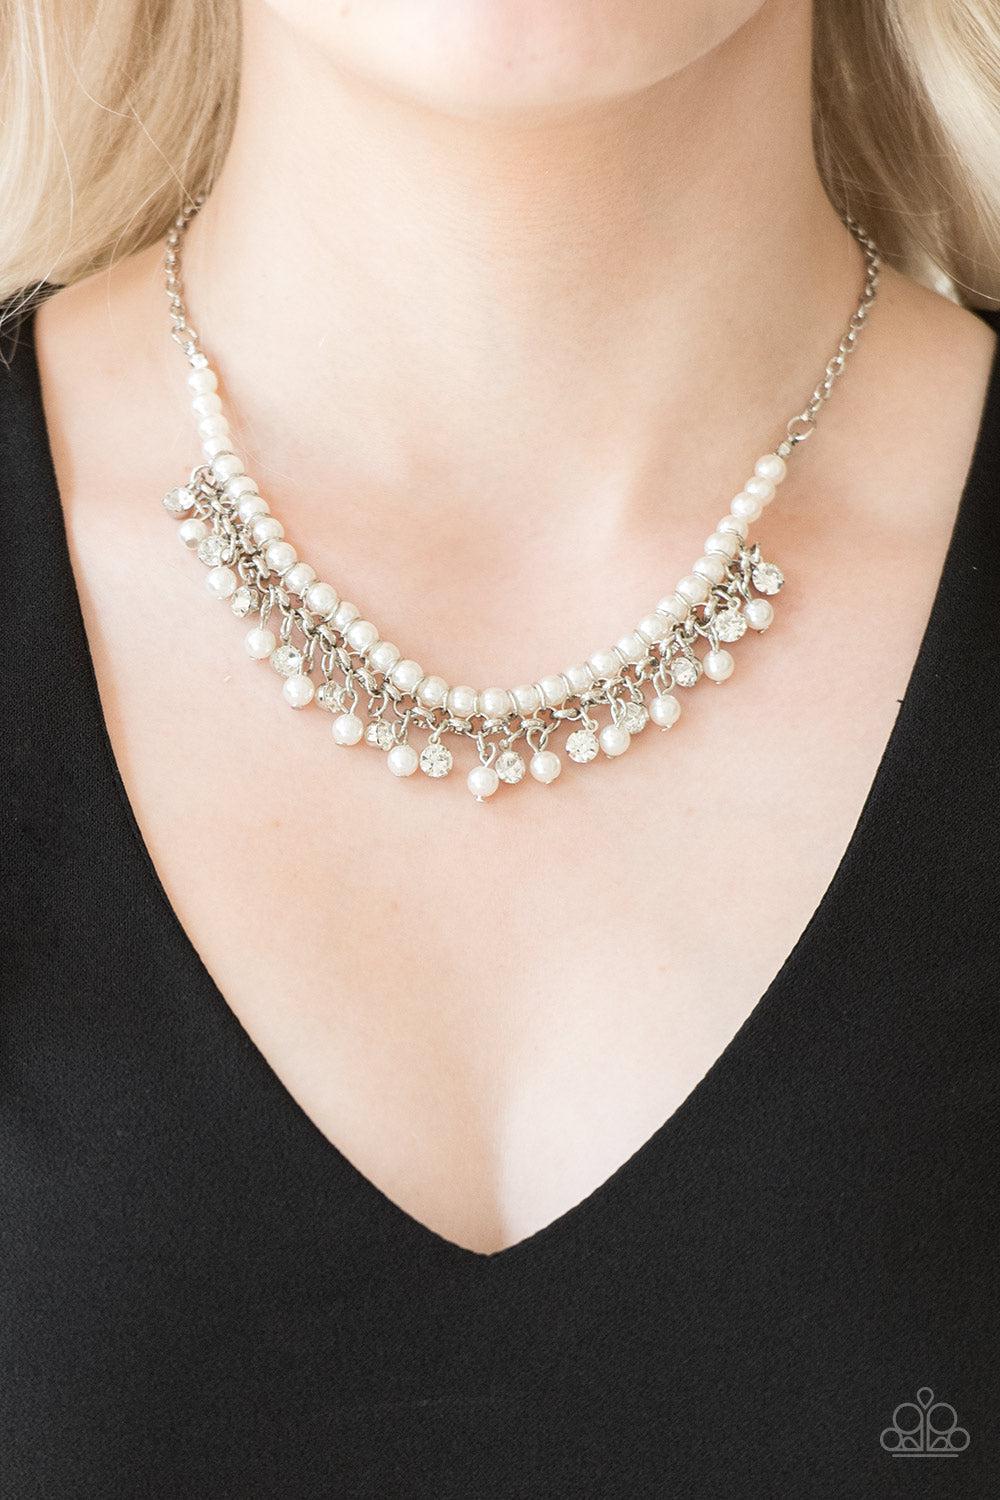 A Touch of CLASSY White Pearl Necklace - Paparazzi Accessories- lightbox - CarasShop.com - $5 Jewelry by Cara Jewels